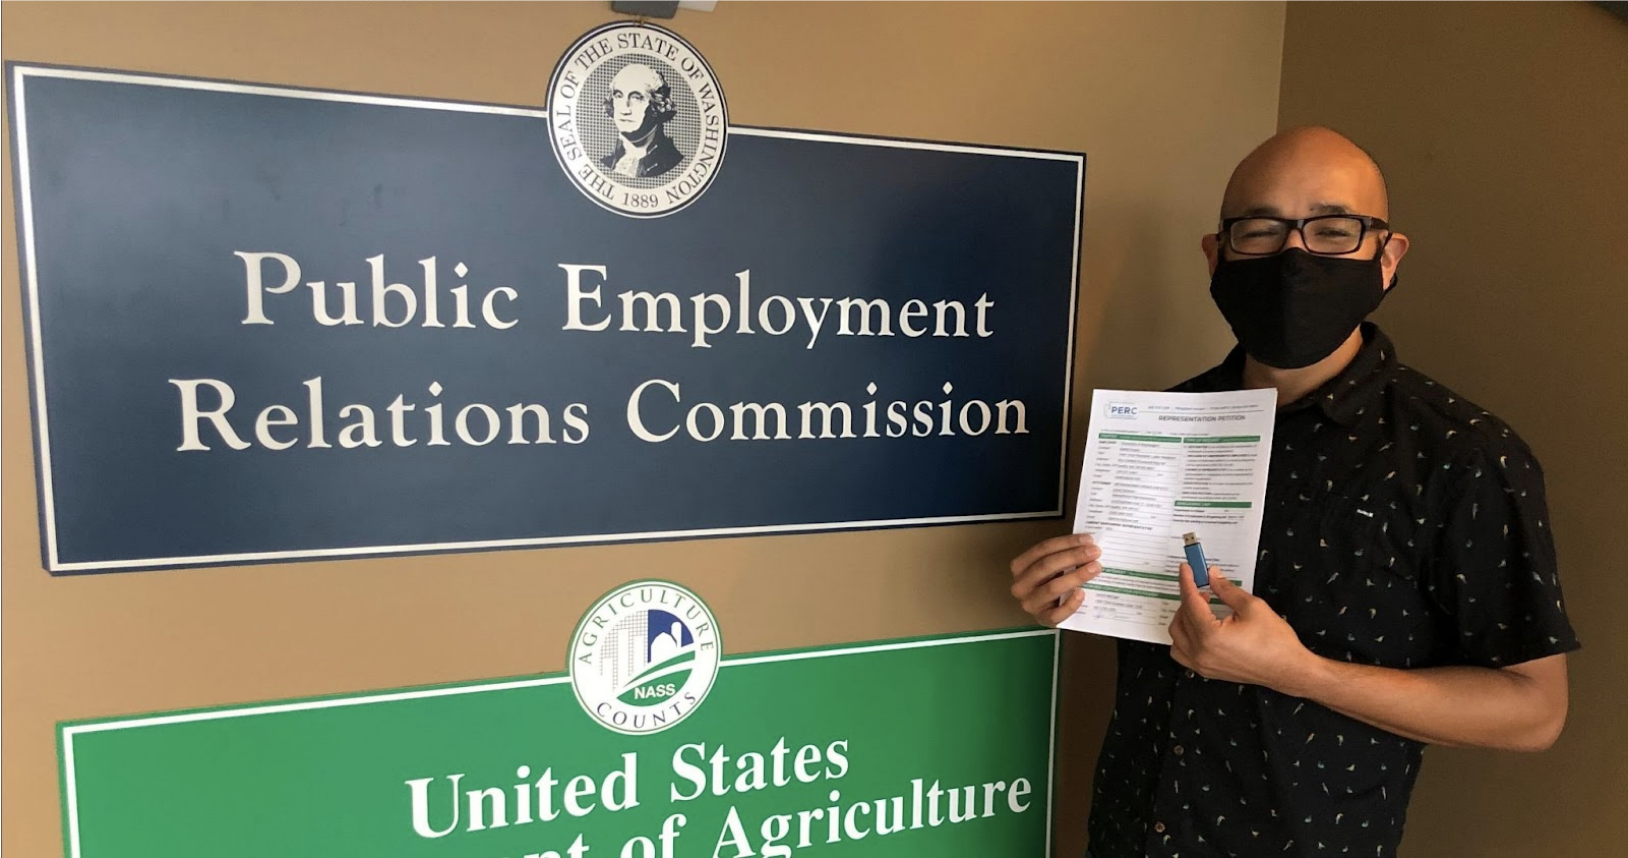 Smiling person with a face mask holding up authorization cards in front of a sign that says "Public Employment Relations Commission"